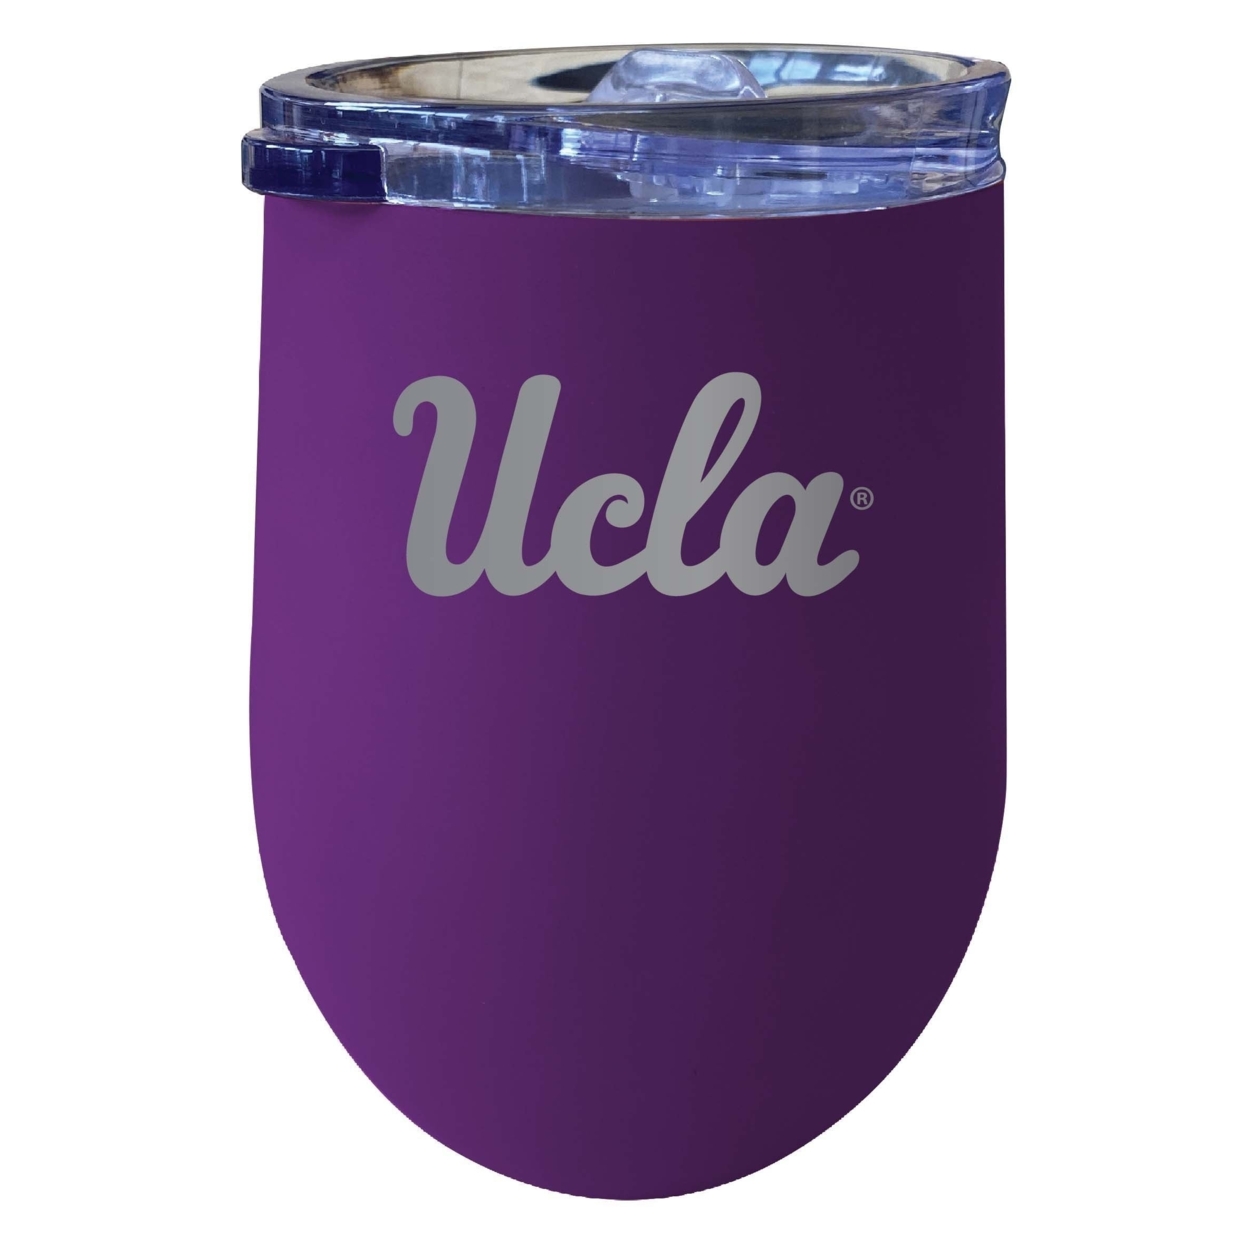 UCLA Bruins 12 Oz Etched Insulated Wine Stainless Steel Tumbler Purple